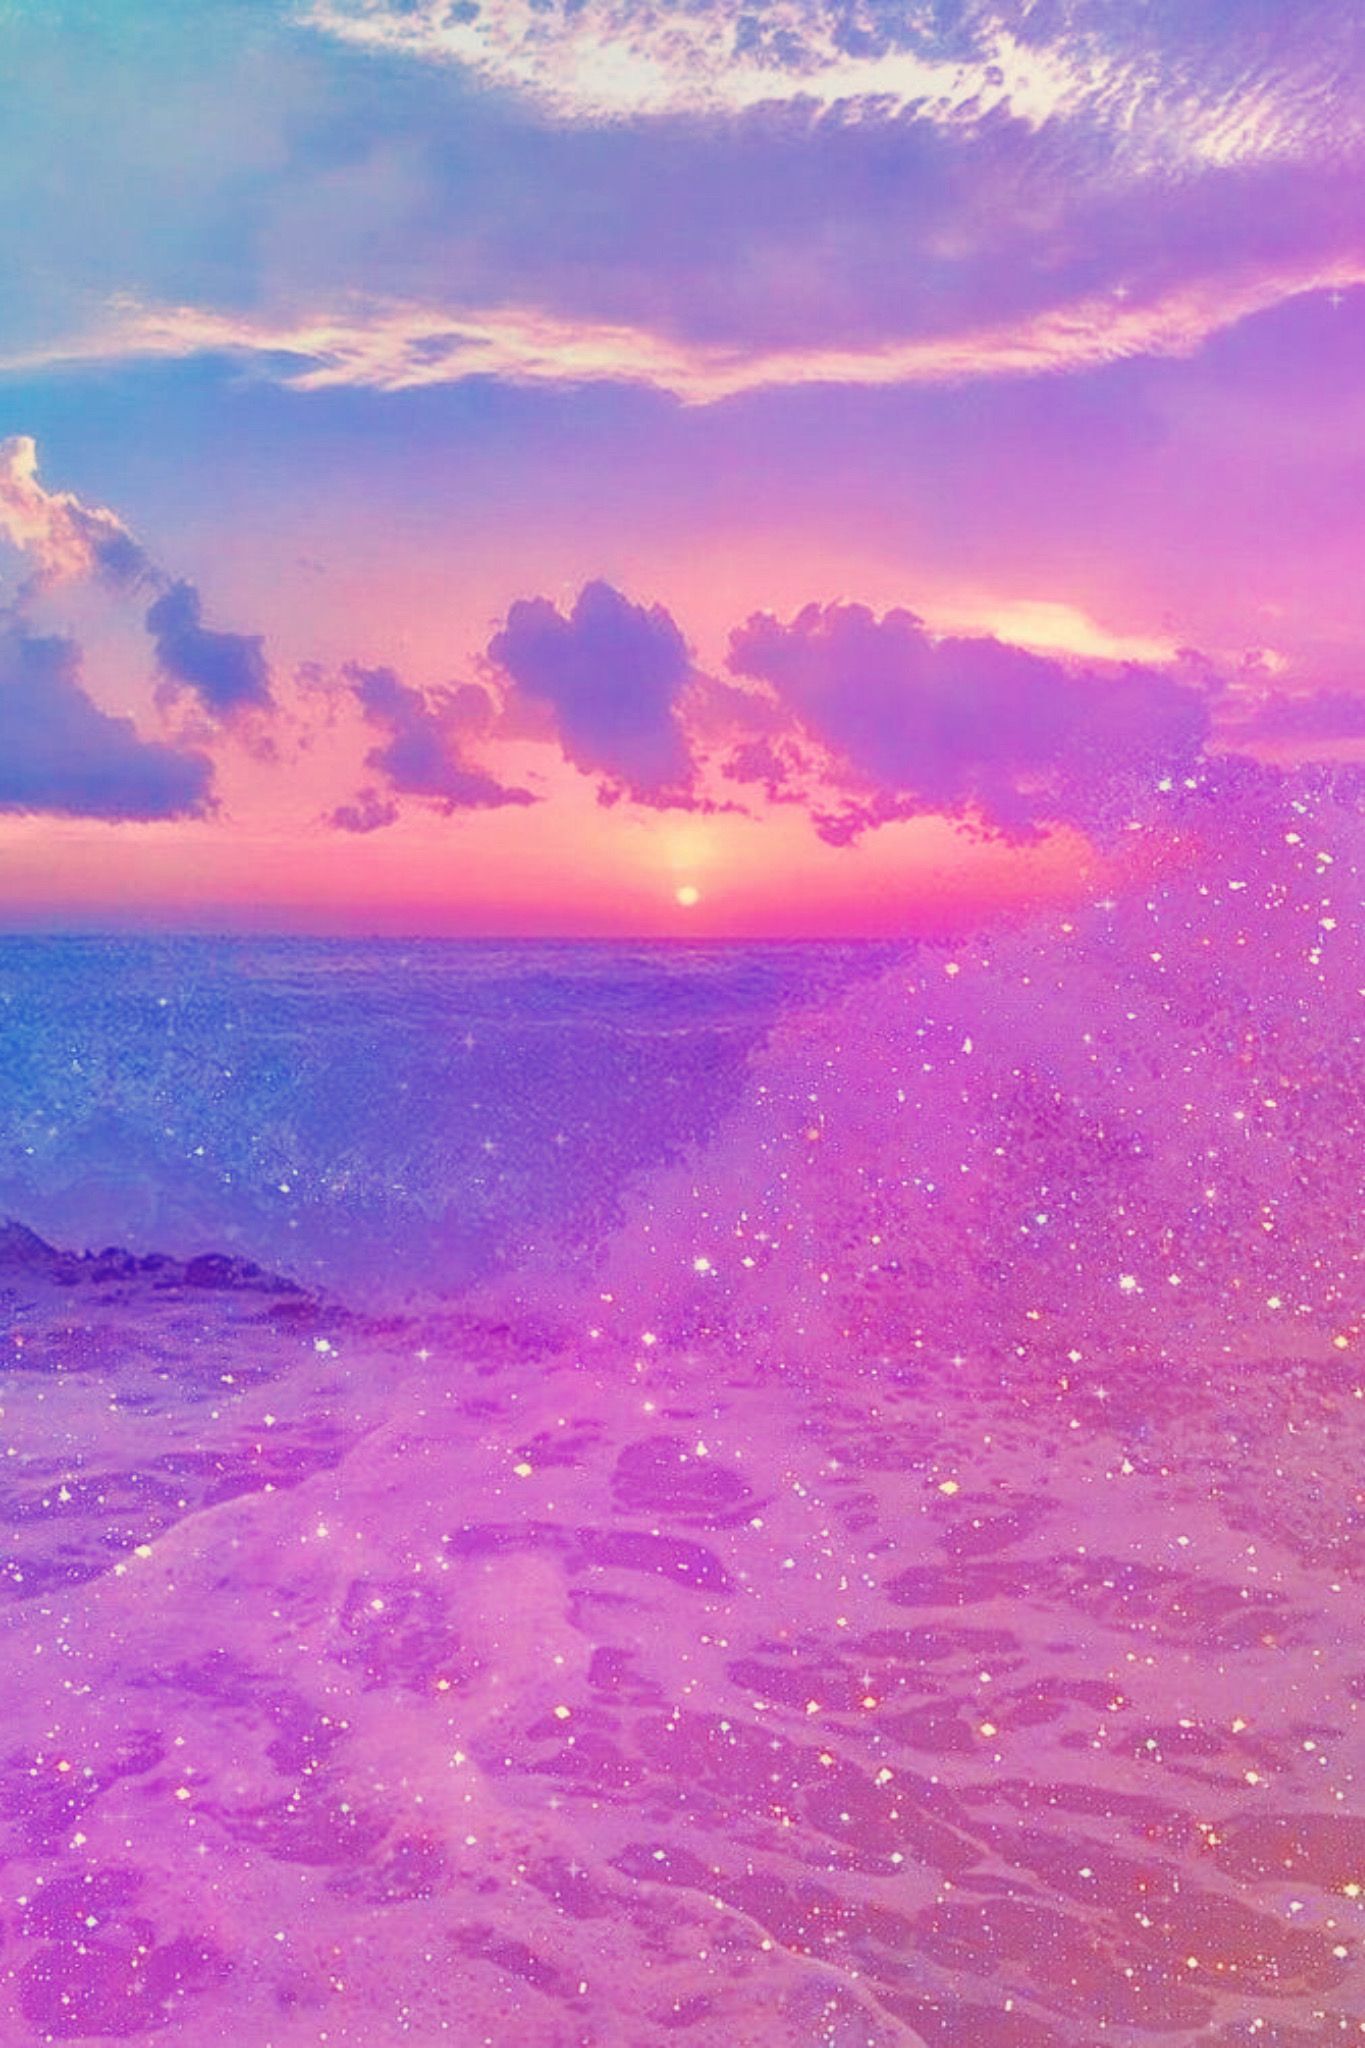 Details more than 57 purple sunset beach wallpaper latest - in.cdgdbentre